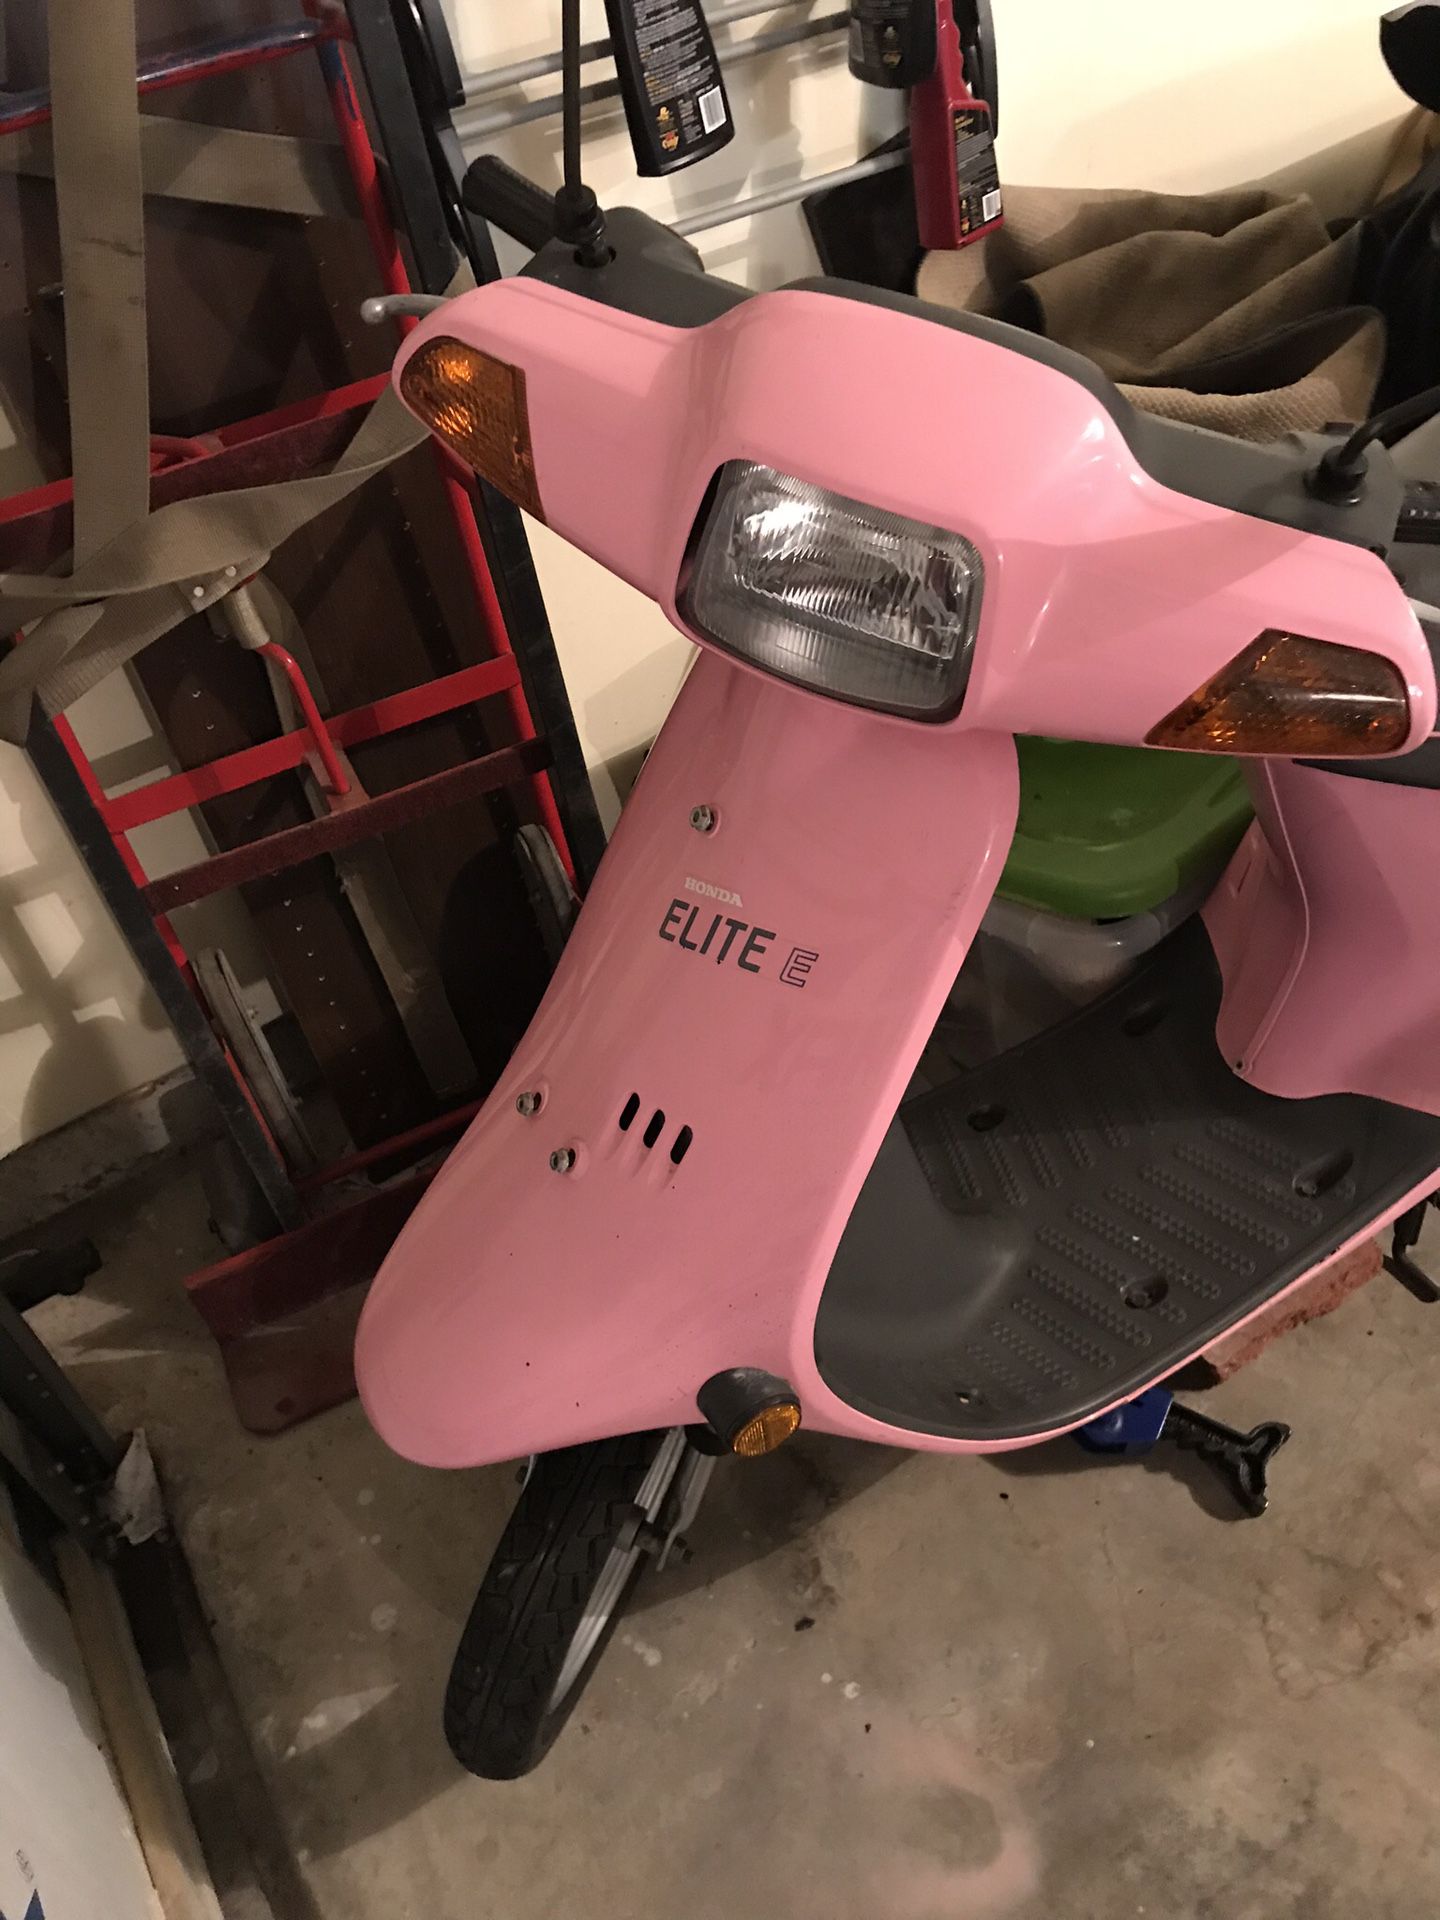 Honda E Scooter for Sale in Houston, TX - OfferUp